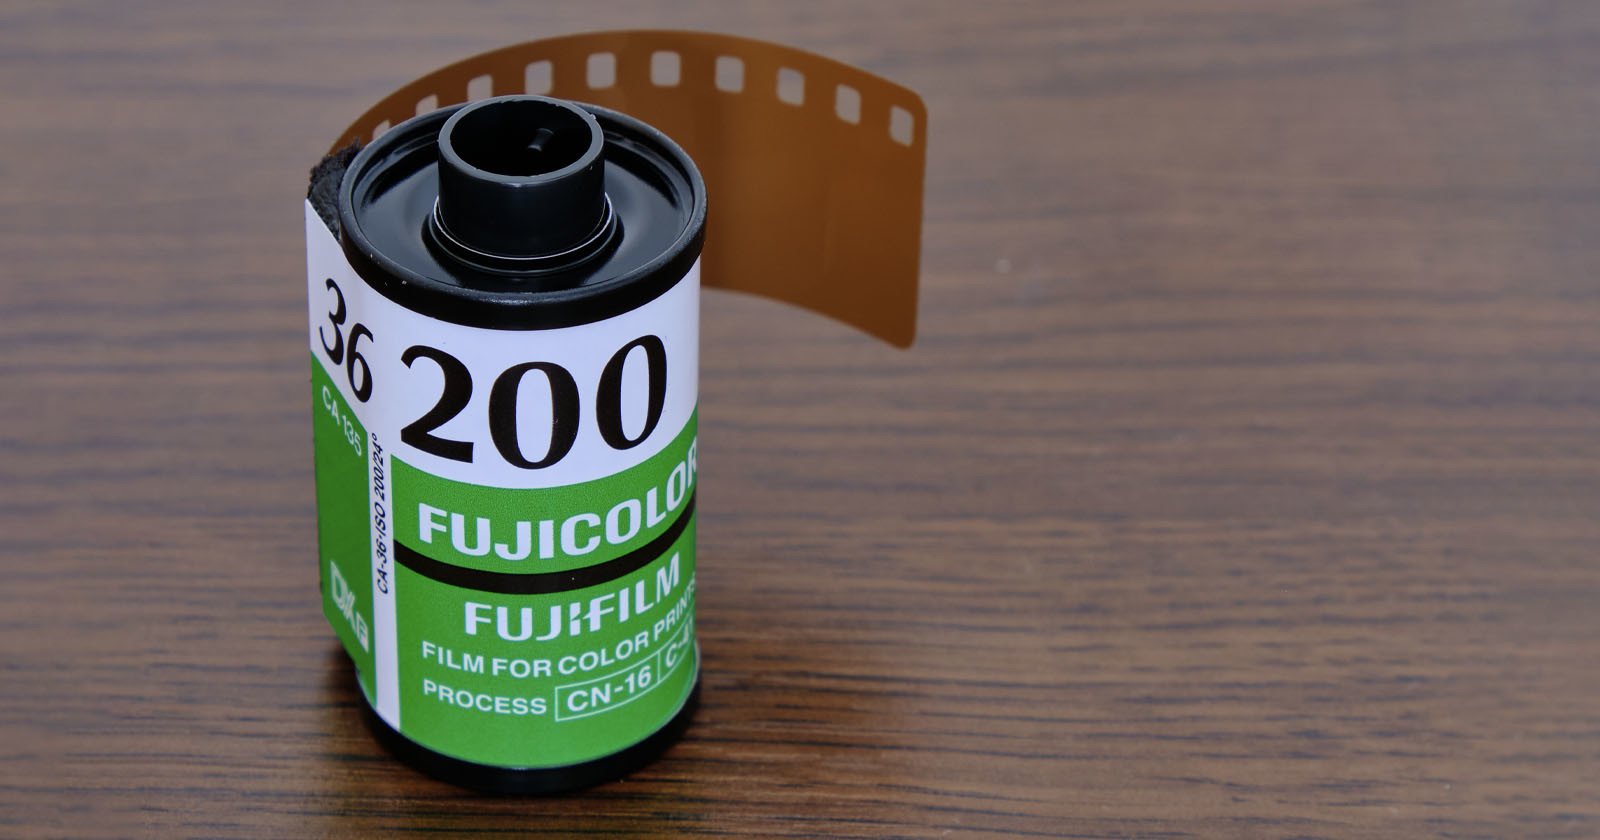 Fujifilm to Hike Film Prices by Up to 60% in April 2022: Report